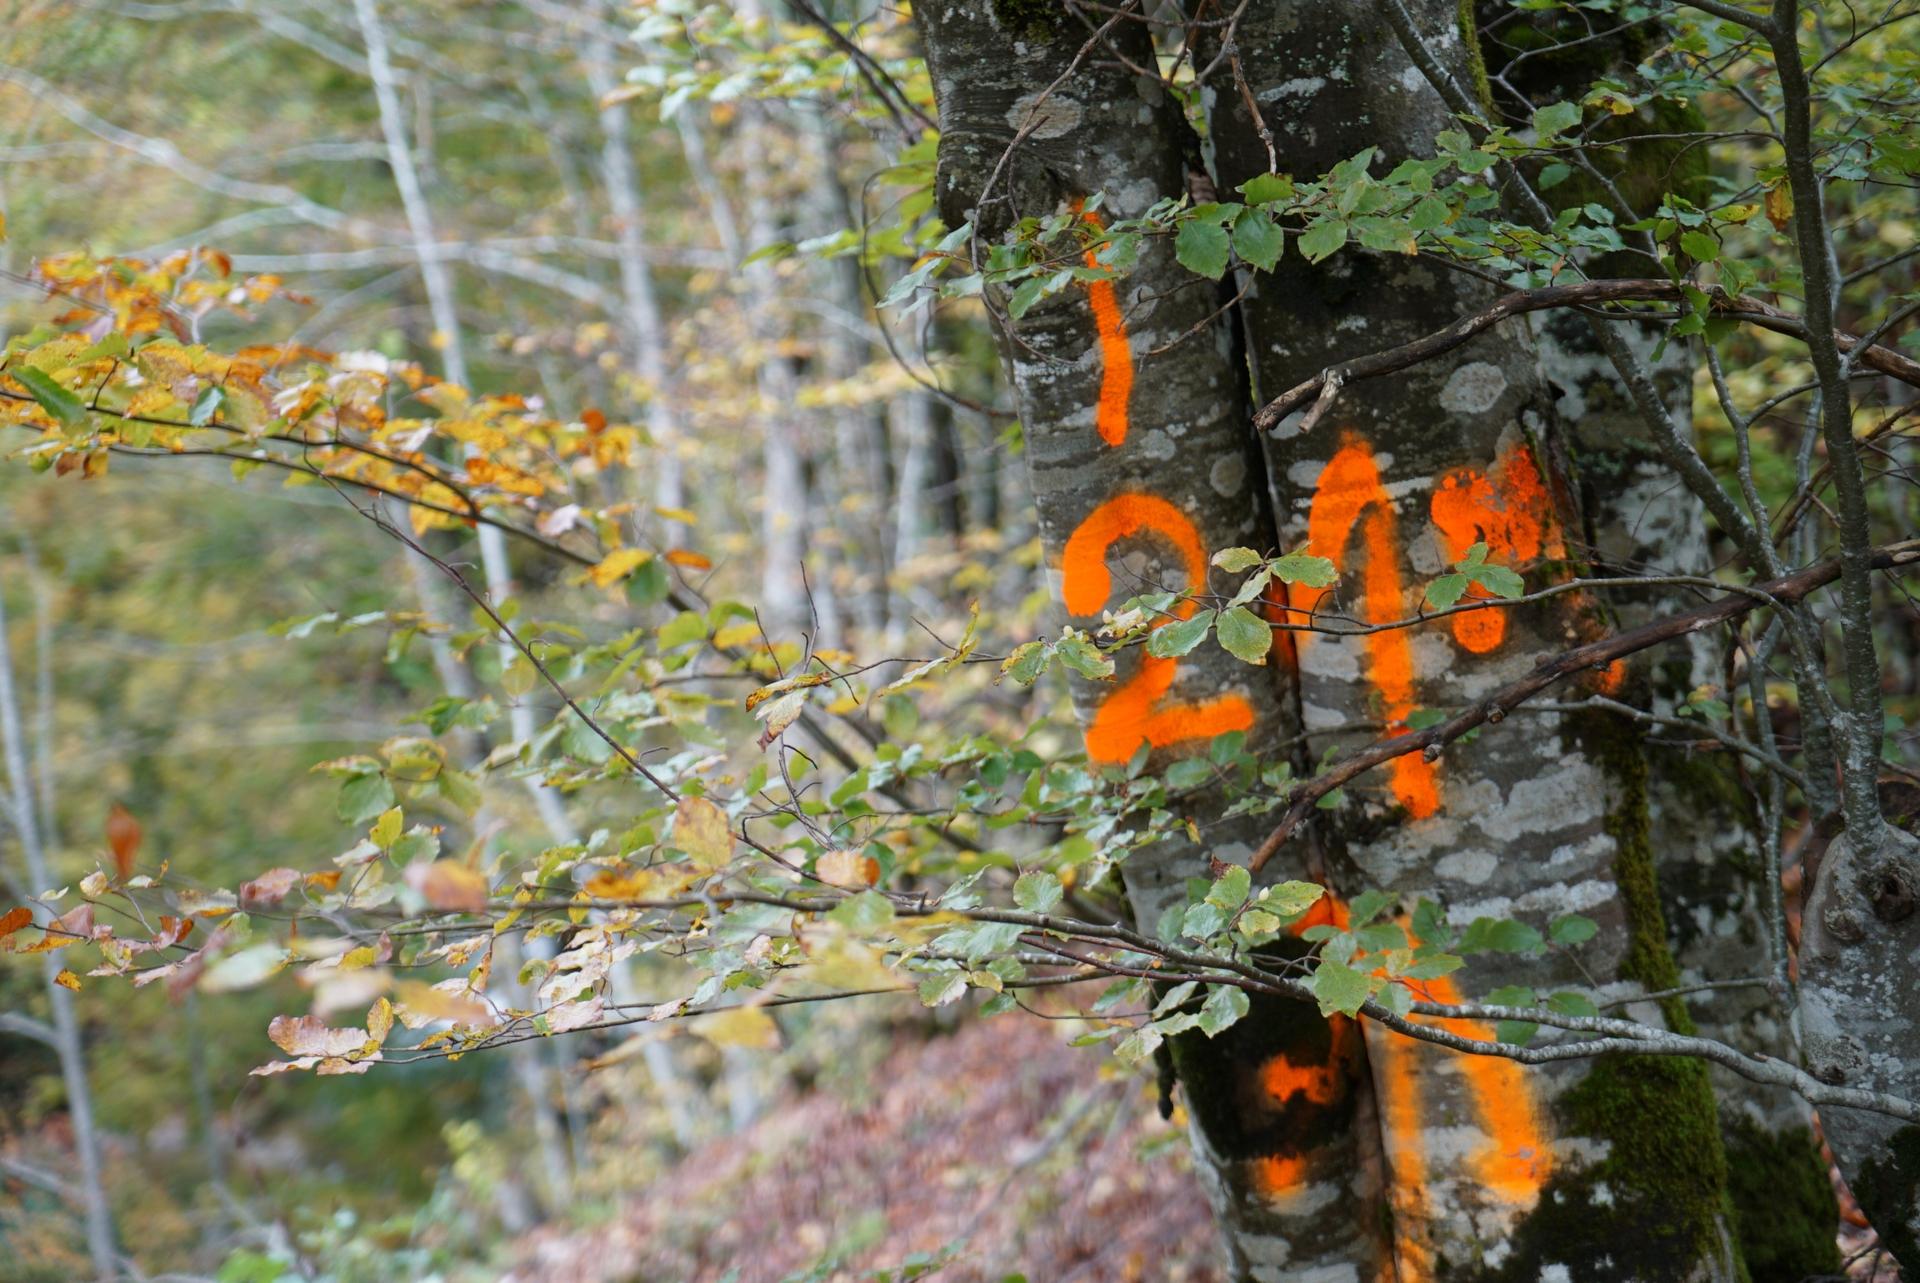 A tree is spray-painted with orange markings